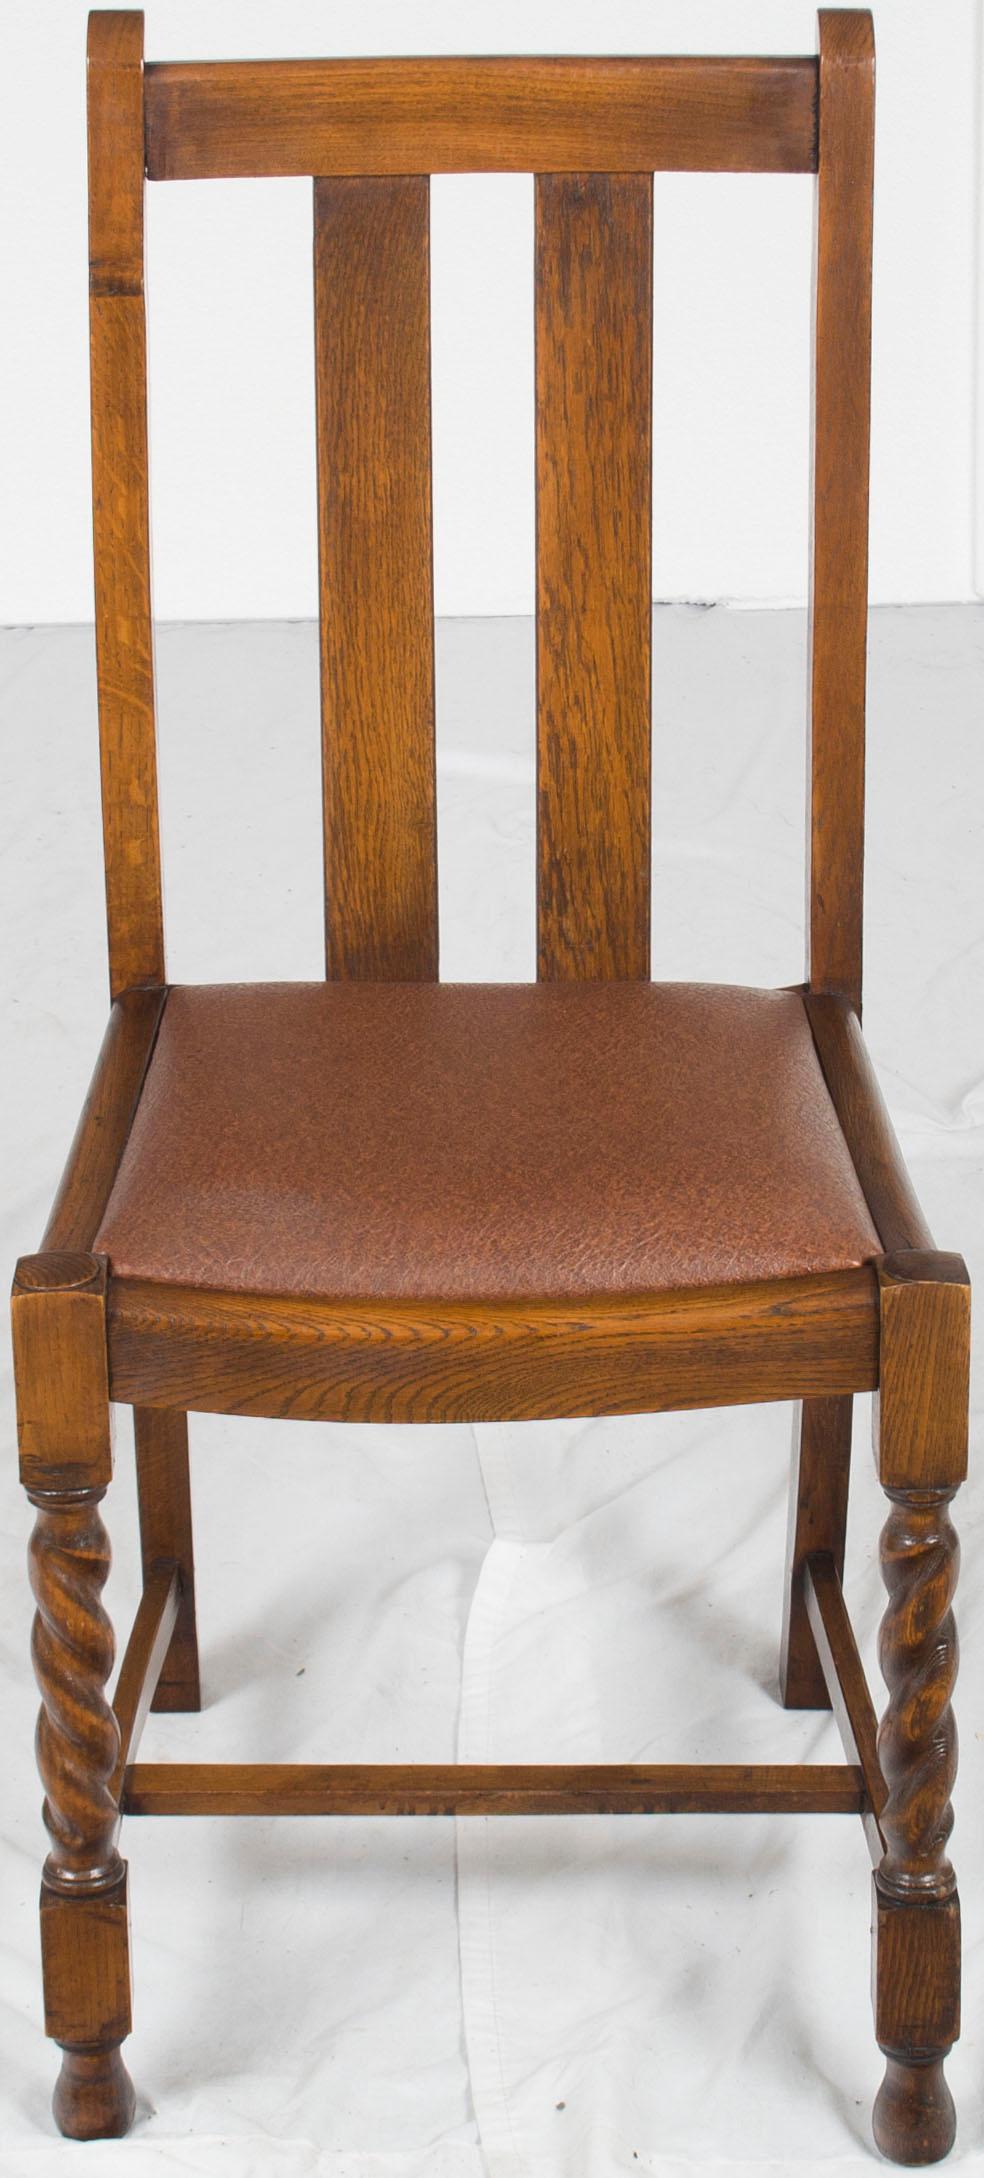 A traditional set of four English oak antique barley twist dining chairs. This set consists of 4 side chairs. All four were made with barley twist front legs and currently have brown leather upholstered seats. The upholstery looks fairly new with no